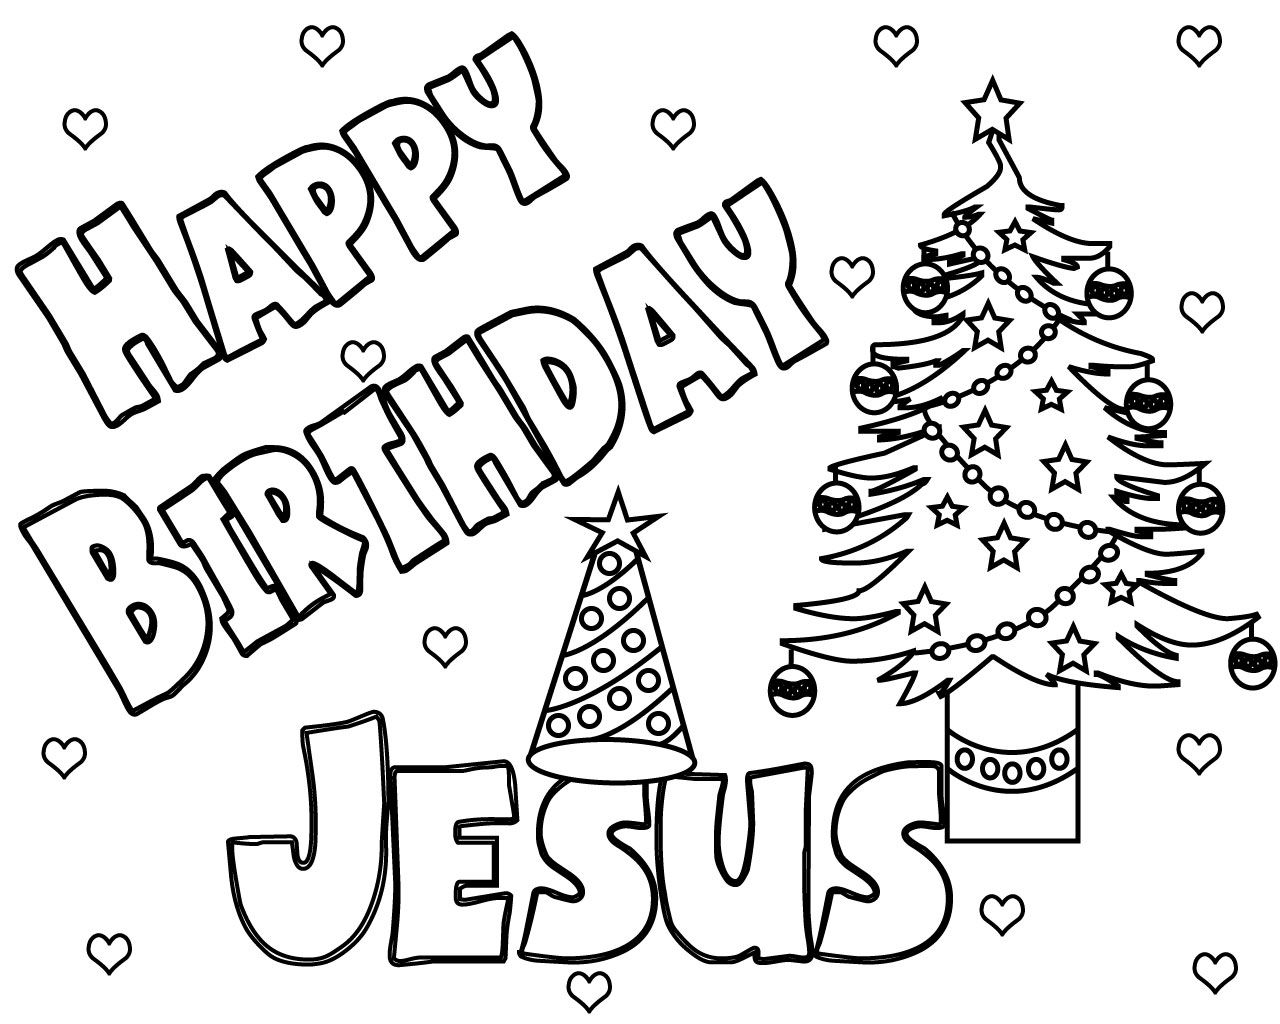 Happy birthday jesus coloring pages jesus birthday is celebrated on th of decembeâ happy birthday jesus birthday coloring pages happy birthday coloring pages